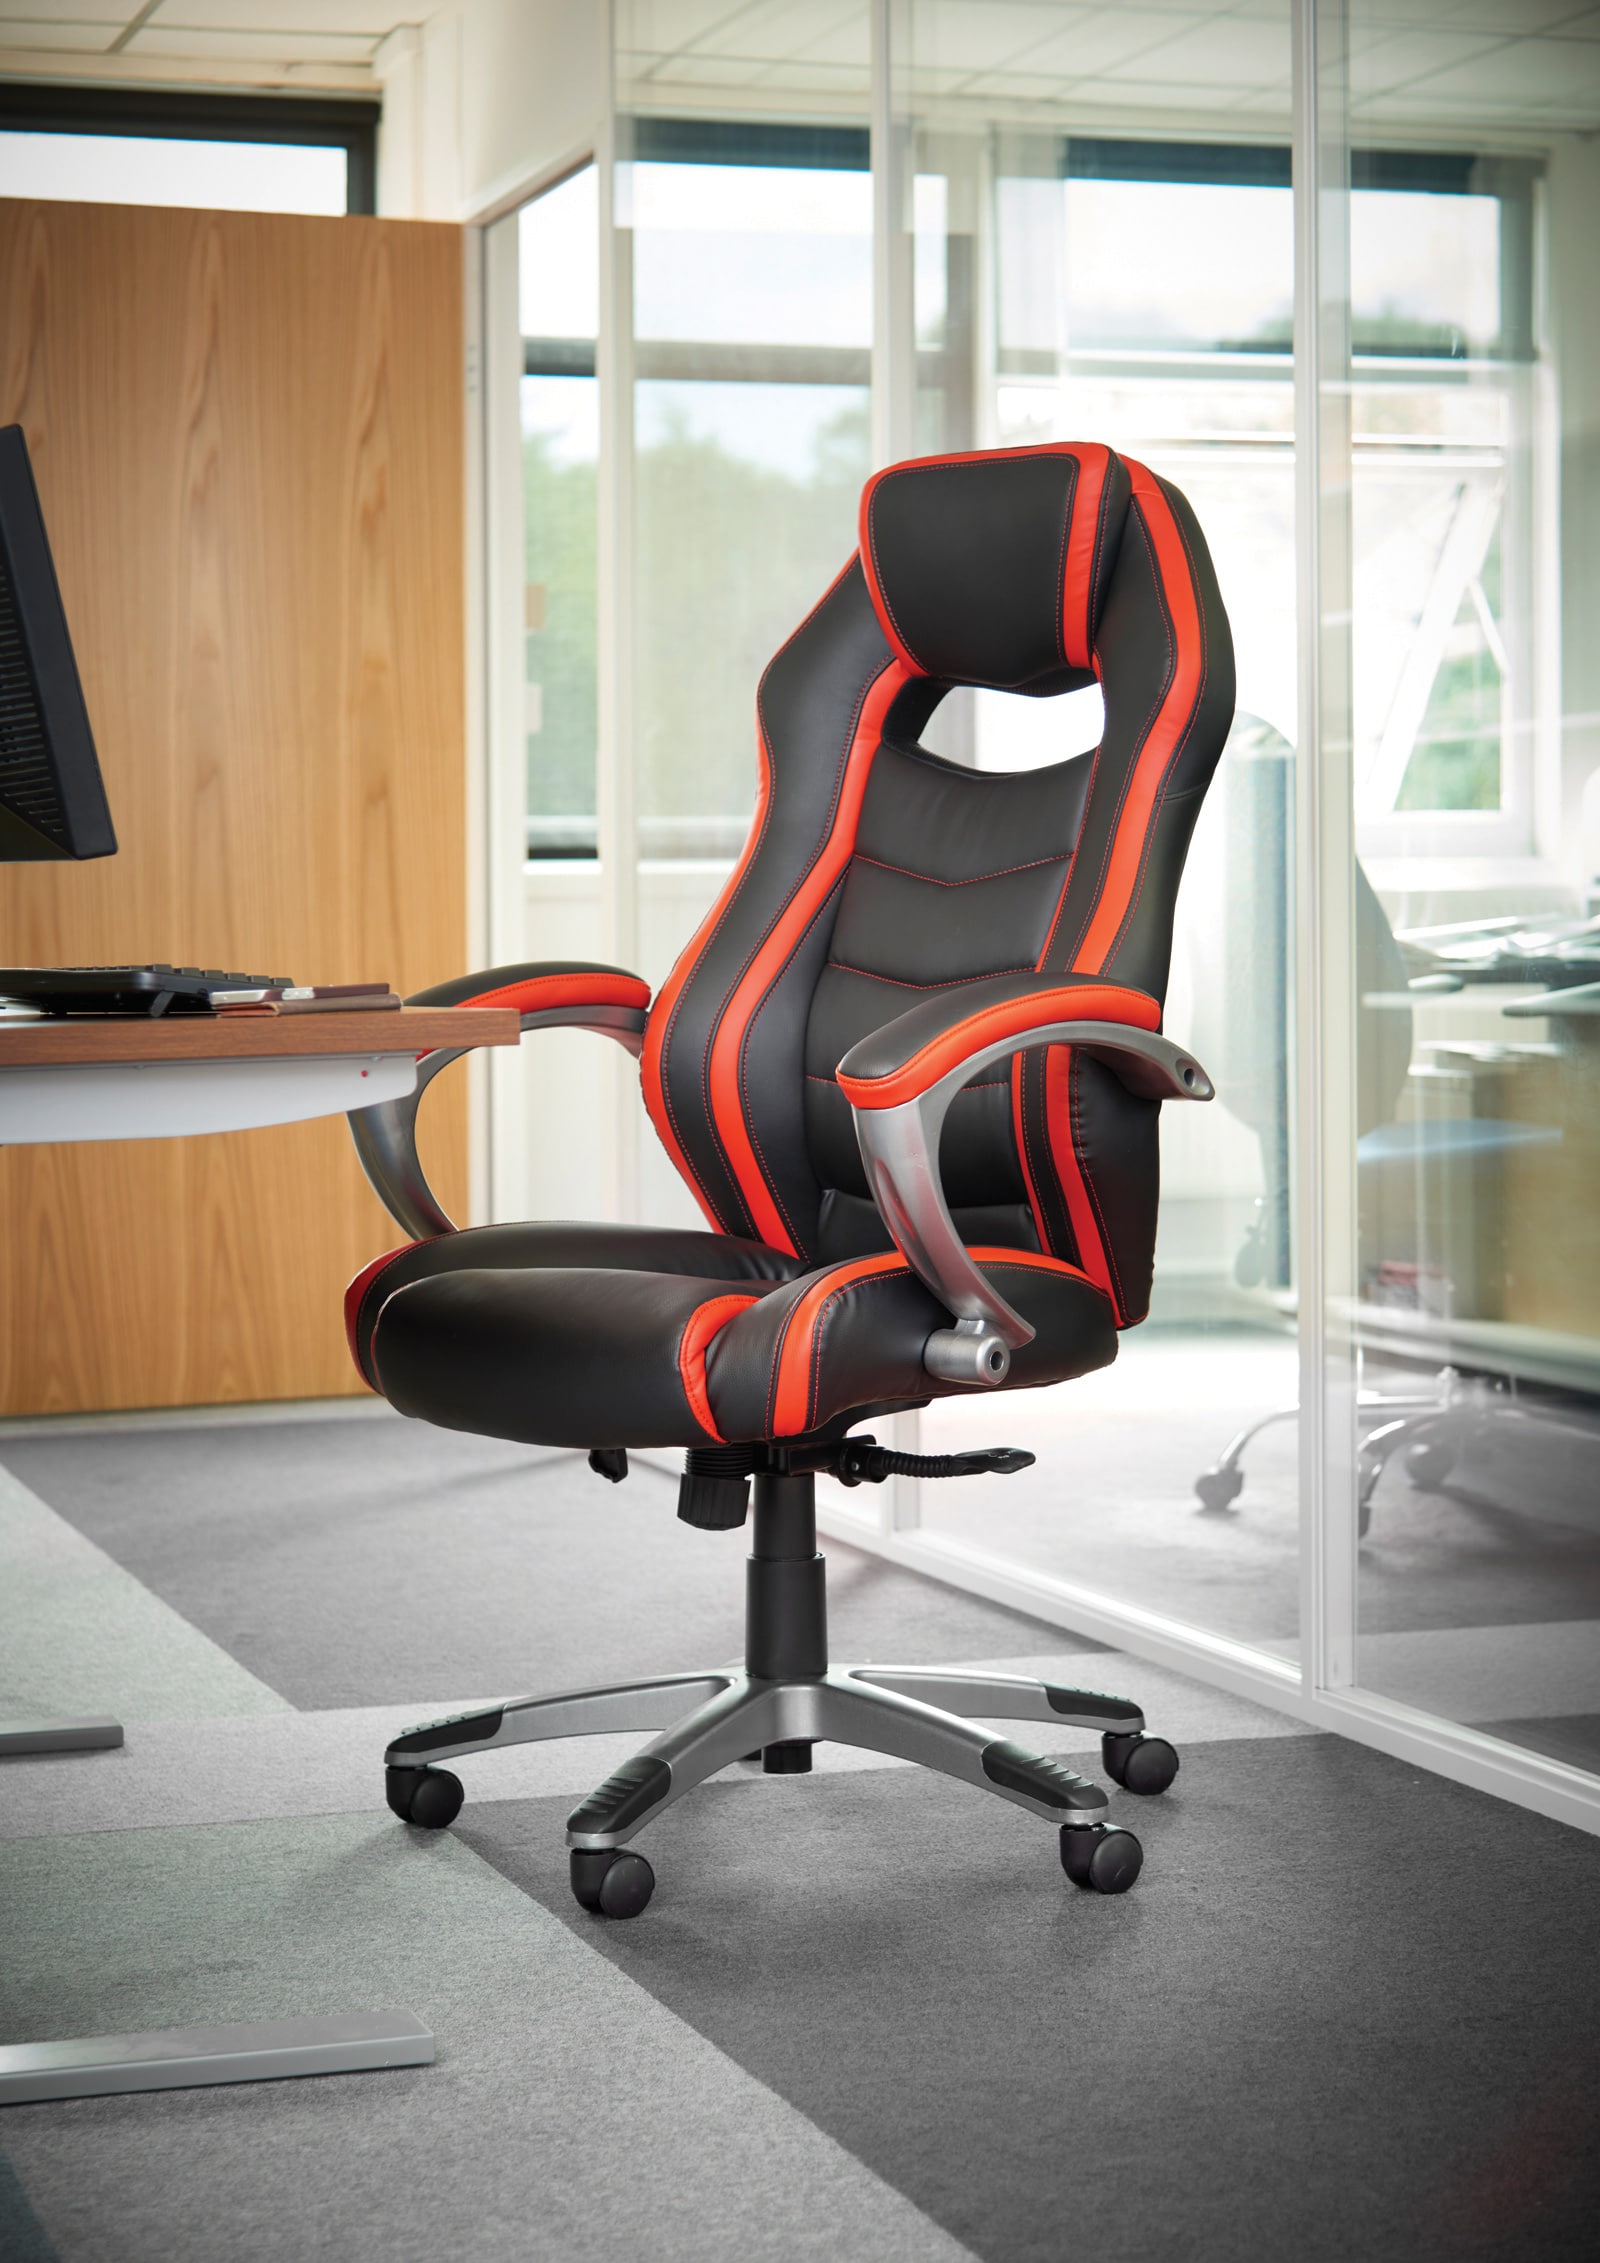 Red or Black Leather Chairs with Straight Back